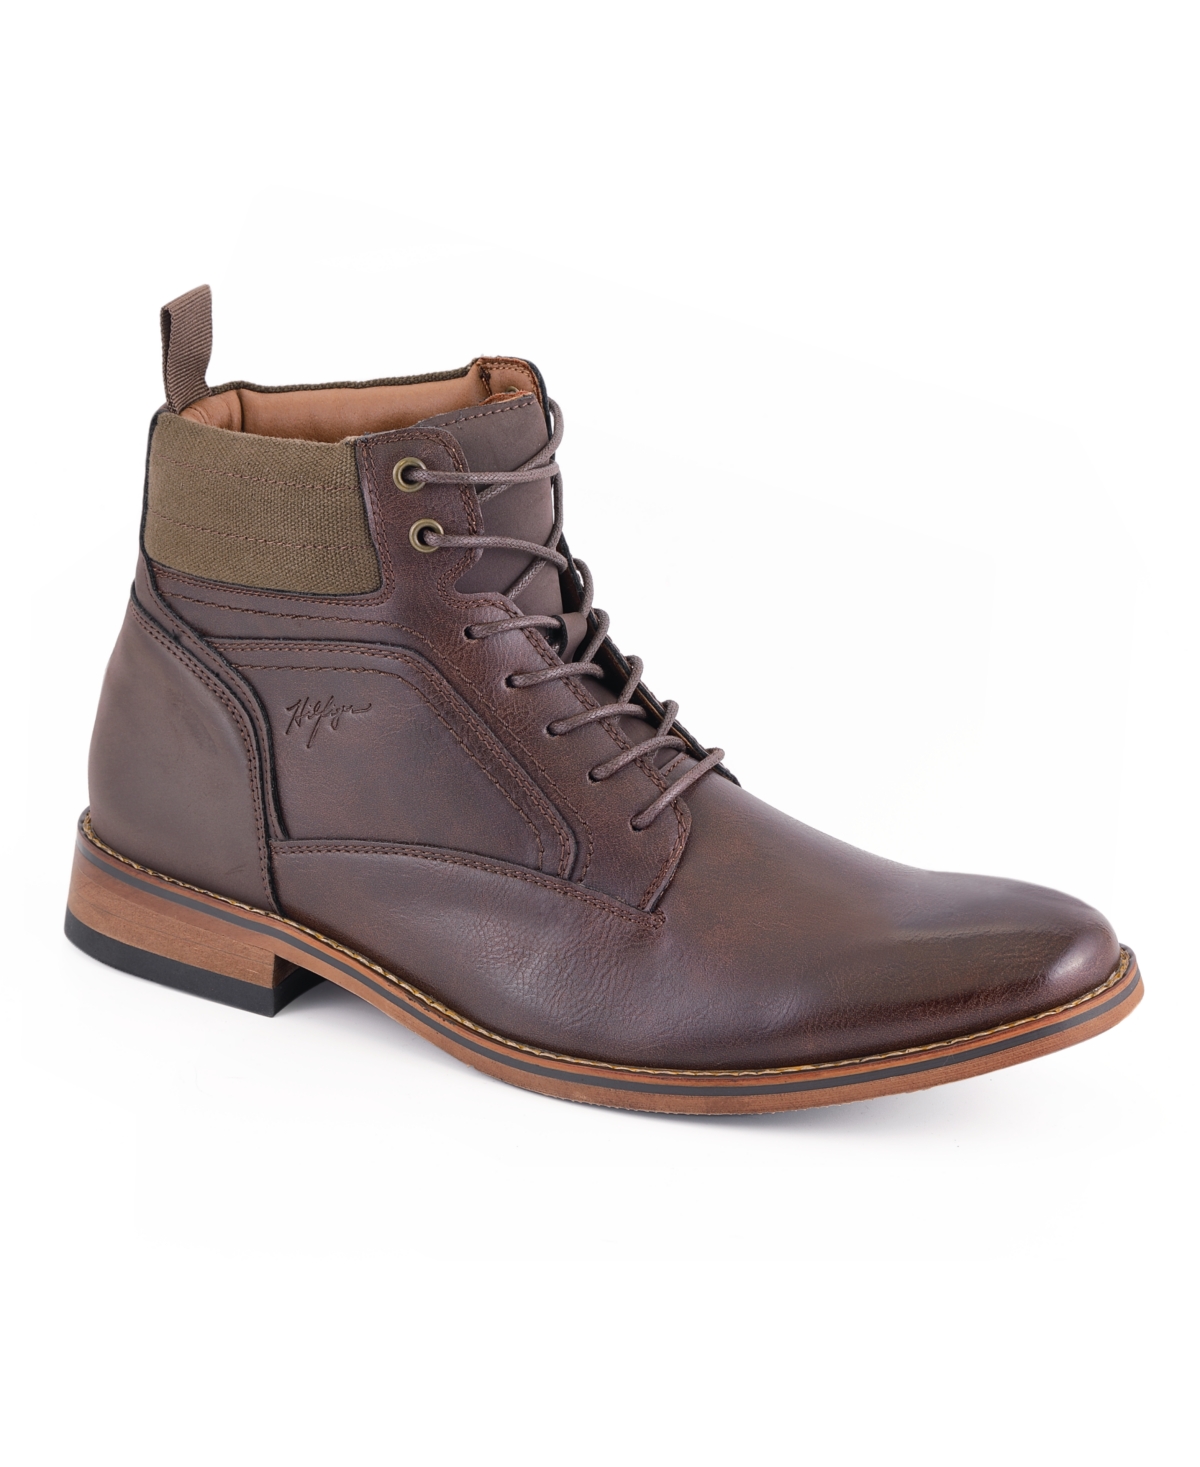 UPC 196496845765 product image for Tommy Hilfiger Men's Bowler Lace Up Casual Boots Men's Shoes | upcitemdb.com